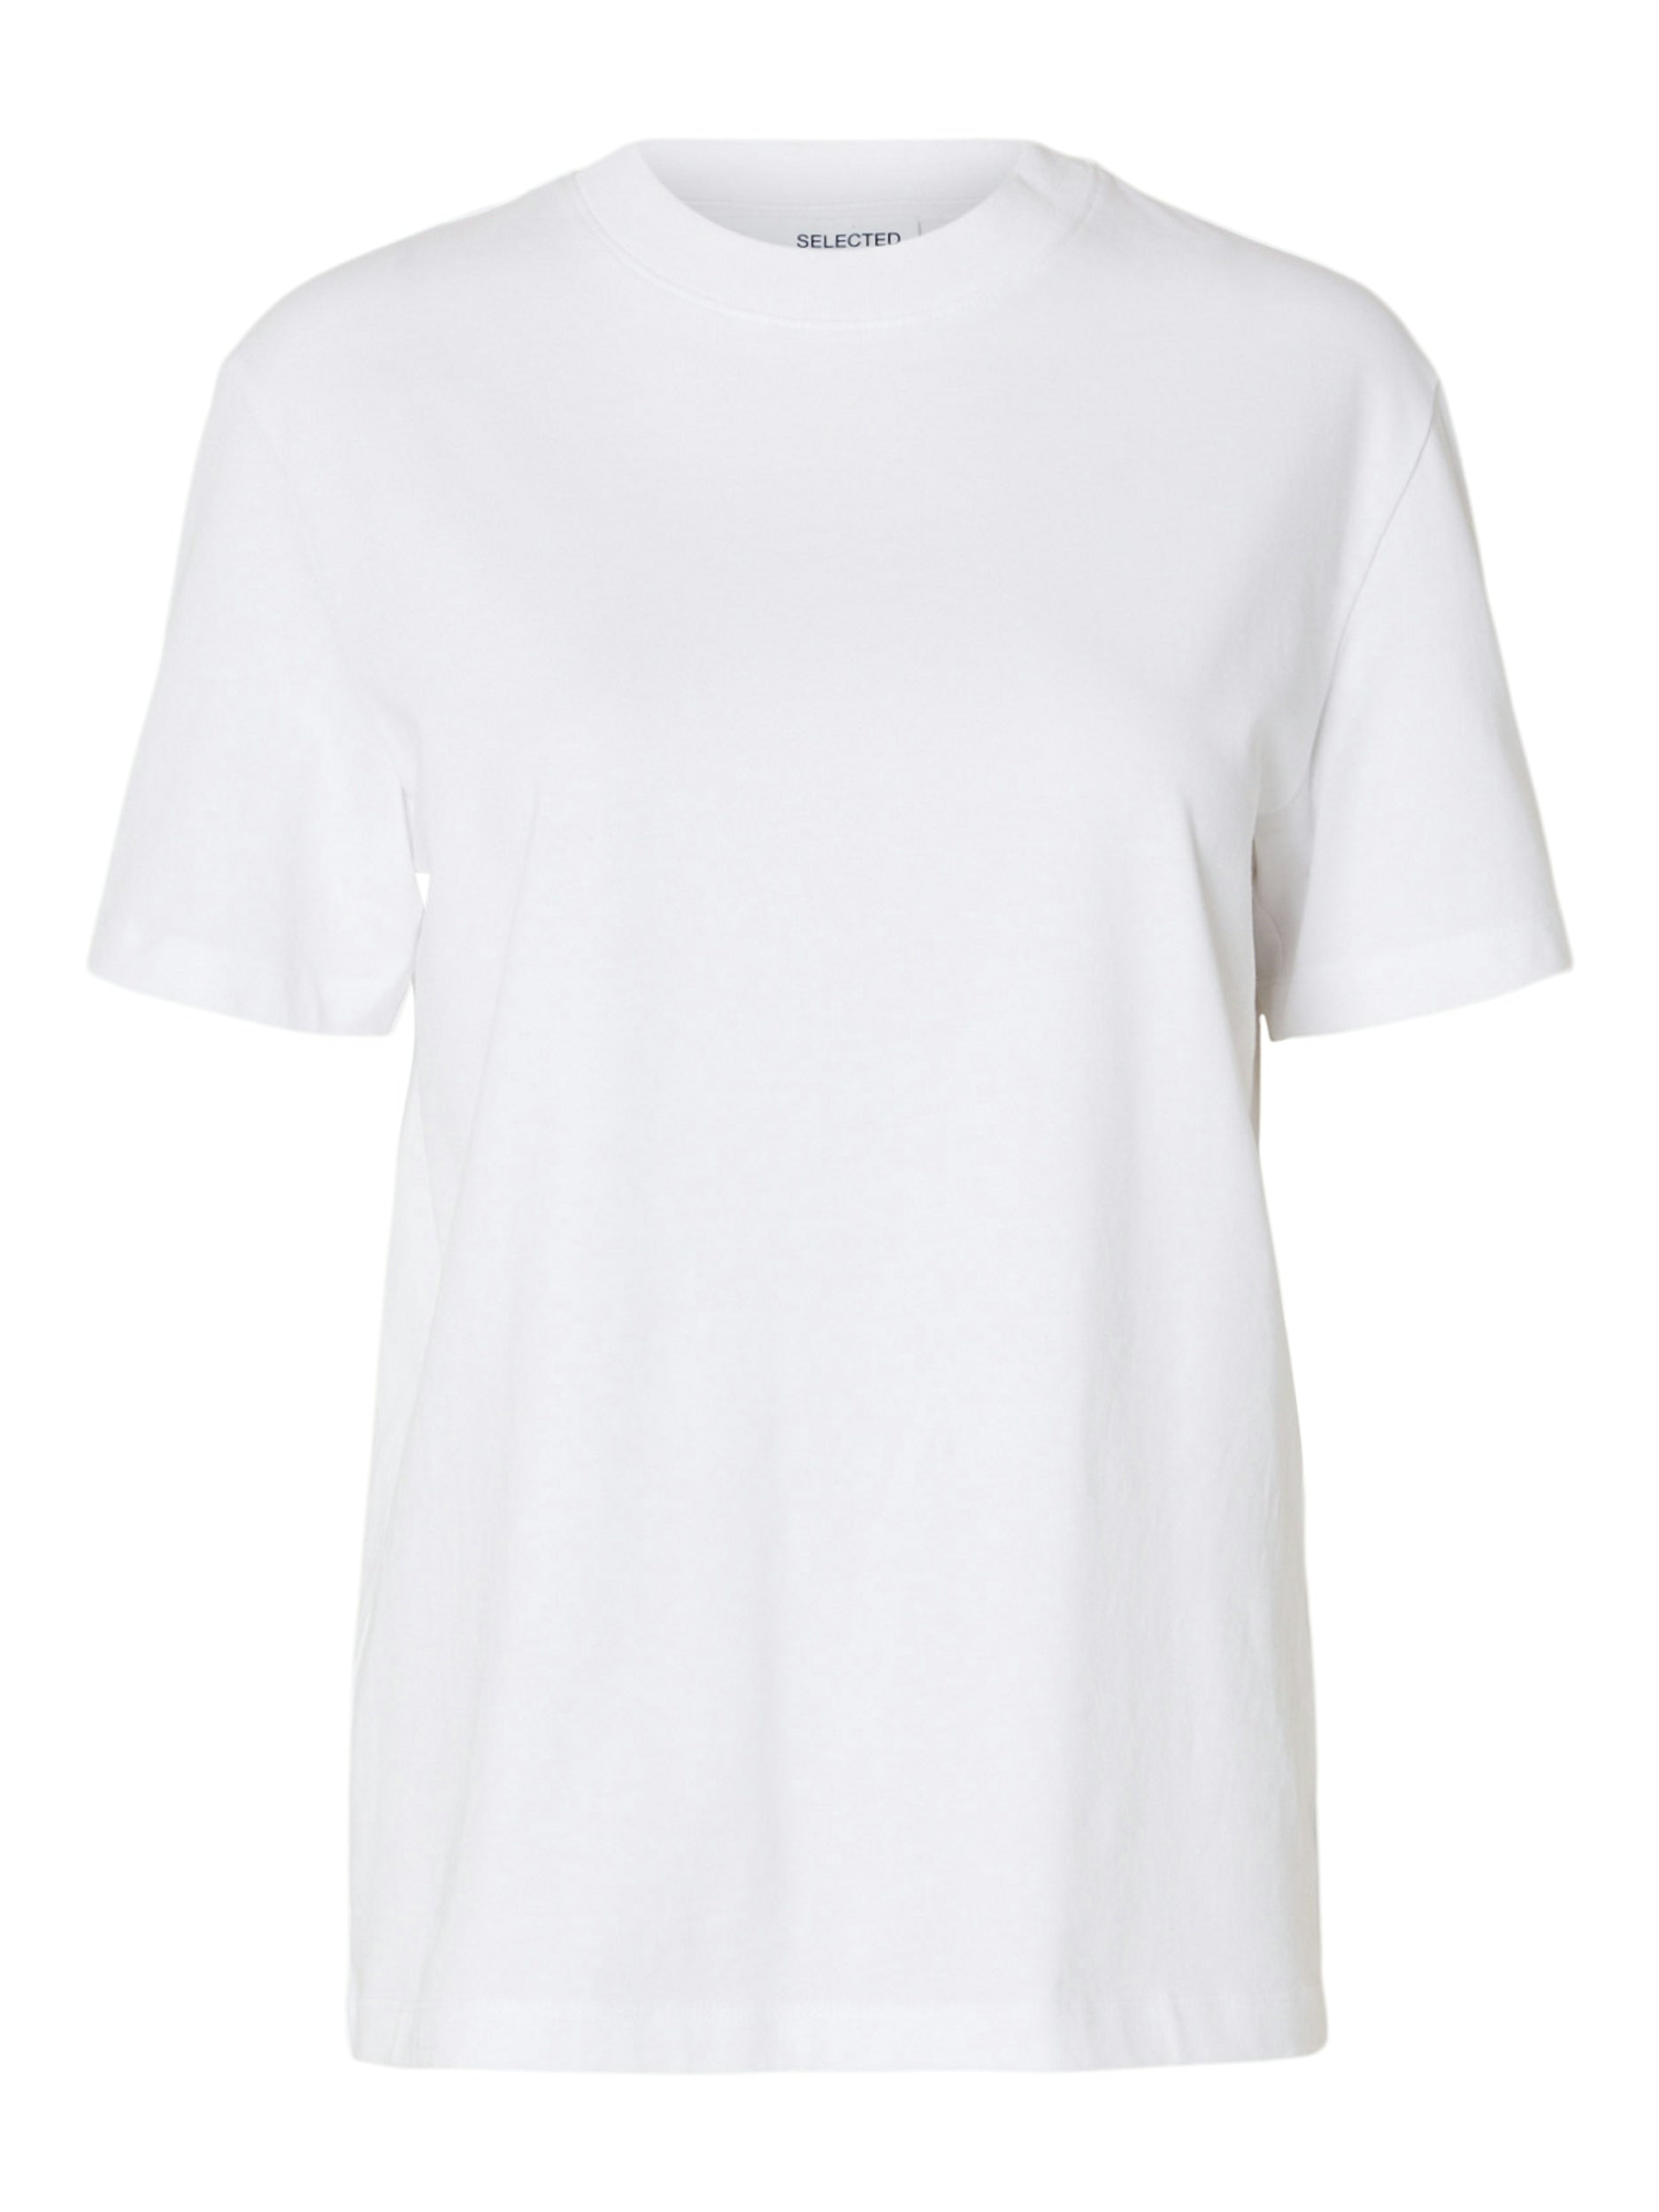 Selected Femme "Relax" Colwoman Mock Neck Tee